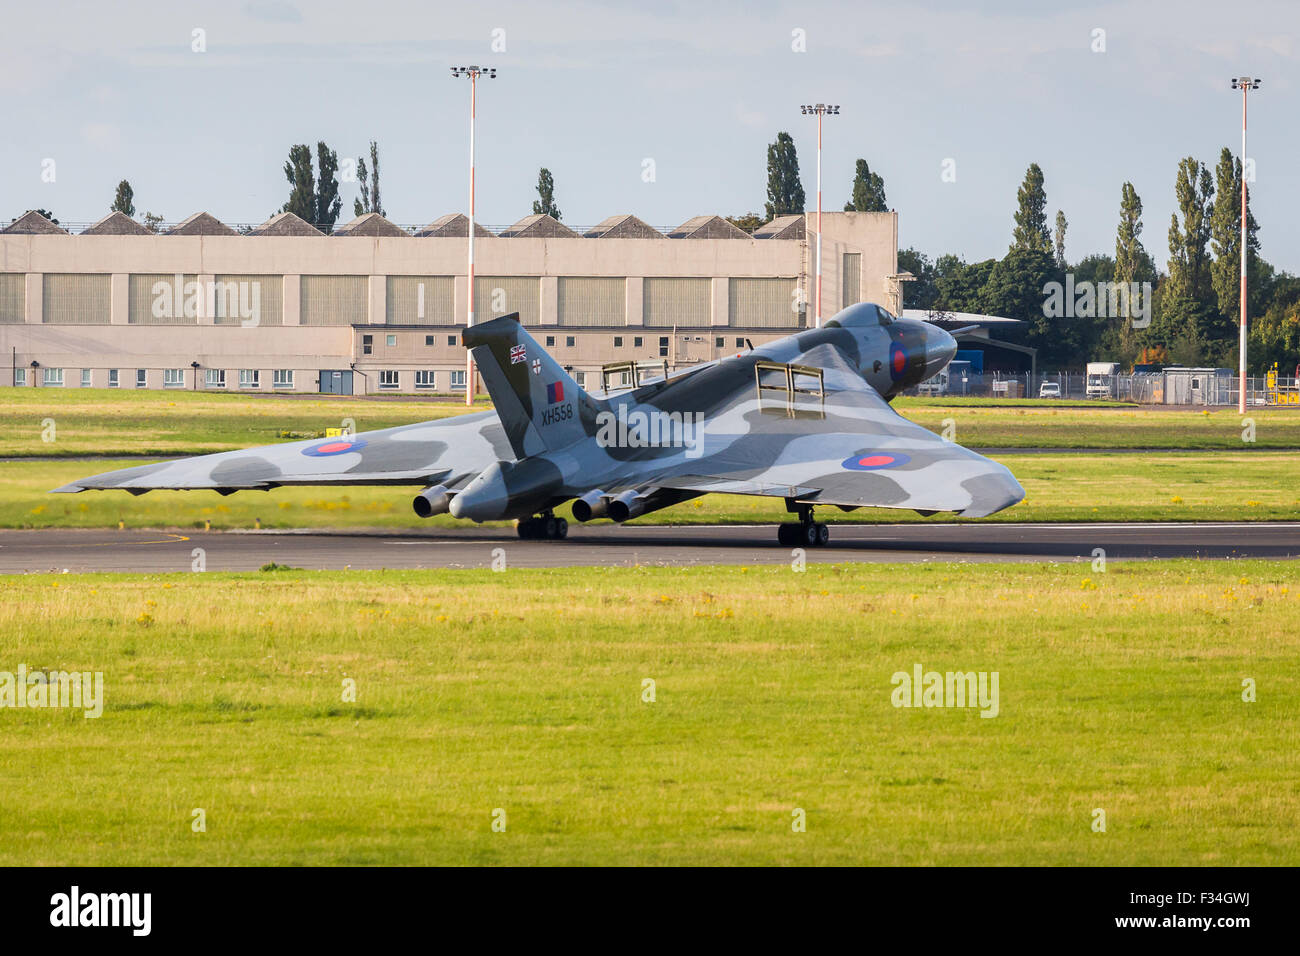 Avro Vulcan lands at Doncaster airport after one of her final flights. Stock Photo